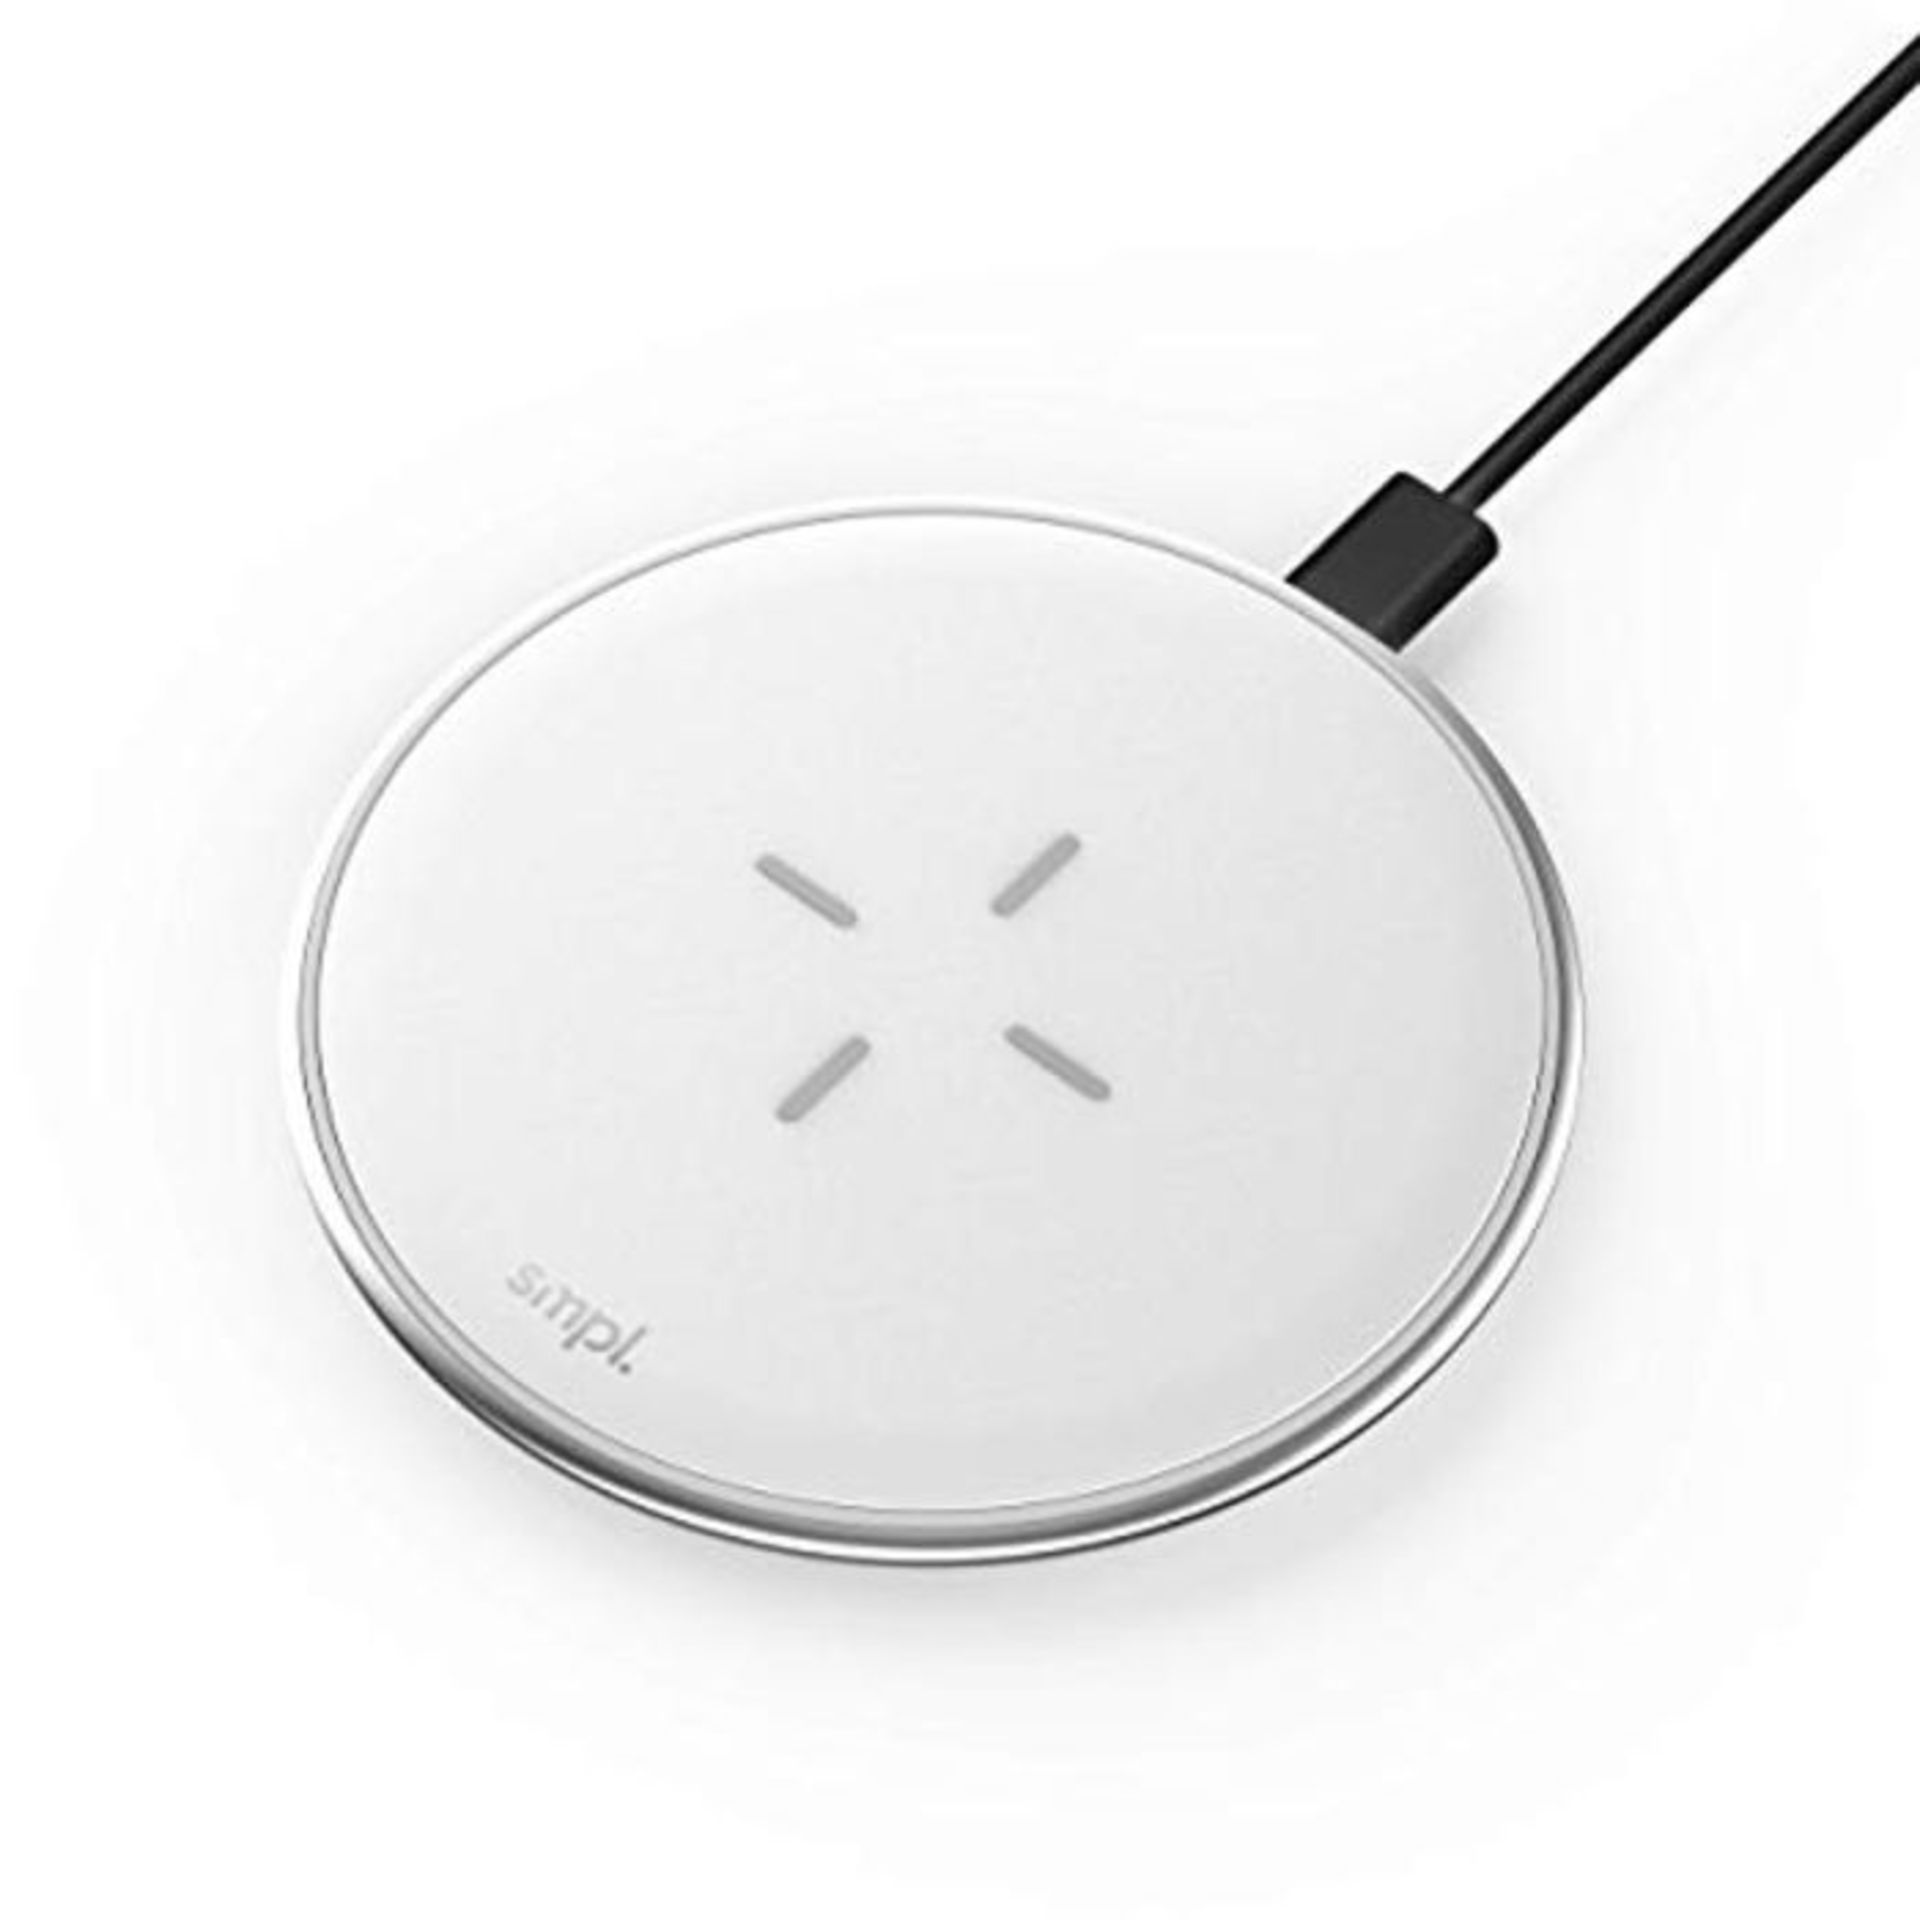 Smpl Fast Wireless Charger - 10W Wireless Charging Pad, Compatible with iPhone 12/12 P